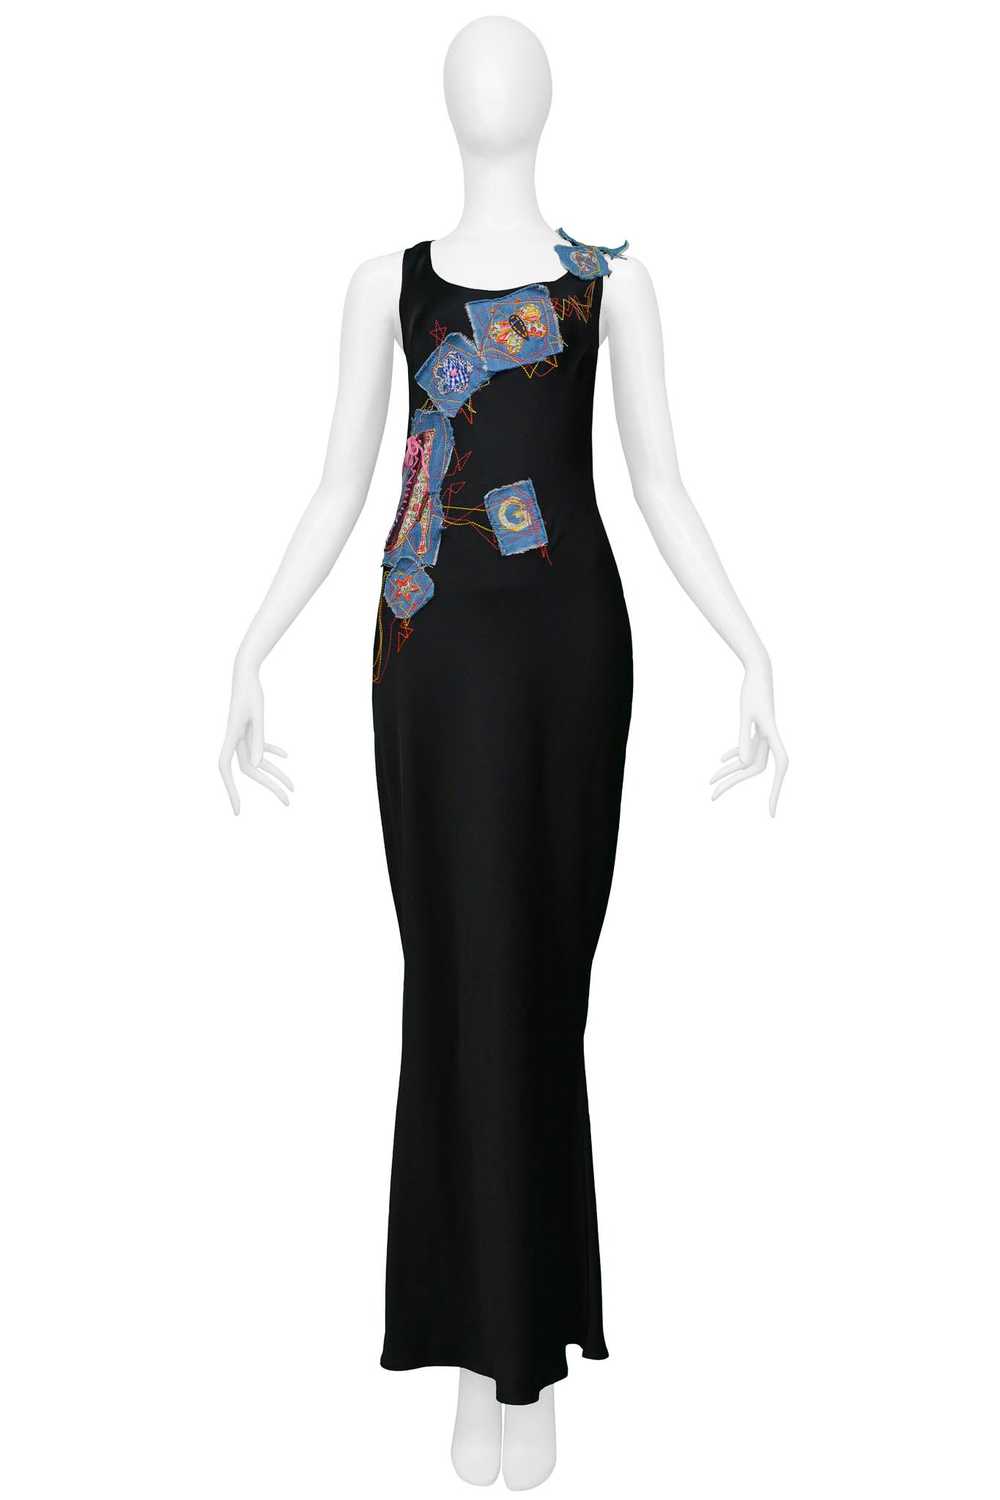 JOHN GALLIANO BLACK SATIN GOWN WITH PATCHWORK & E… - image 1